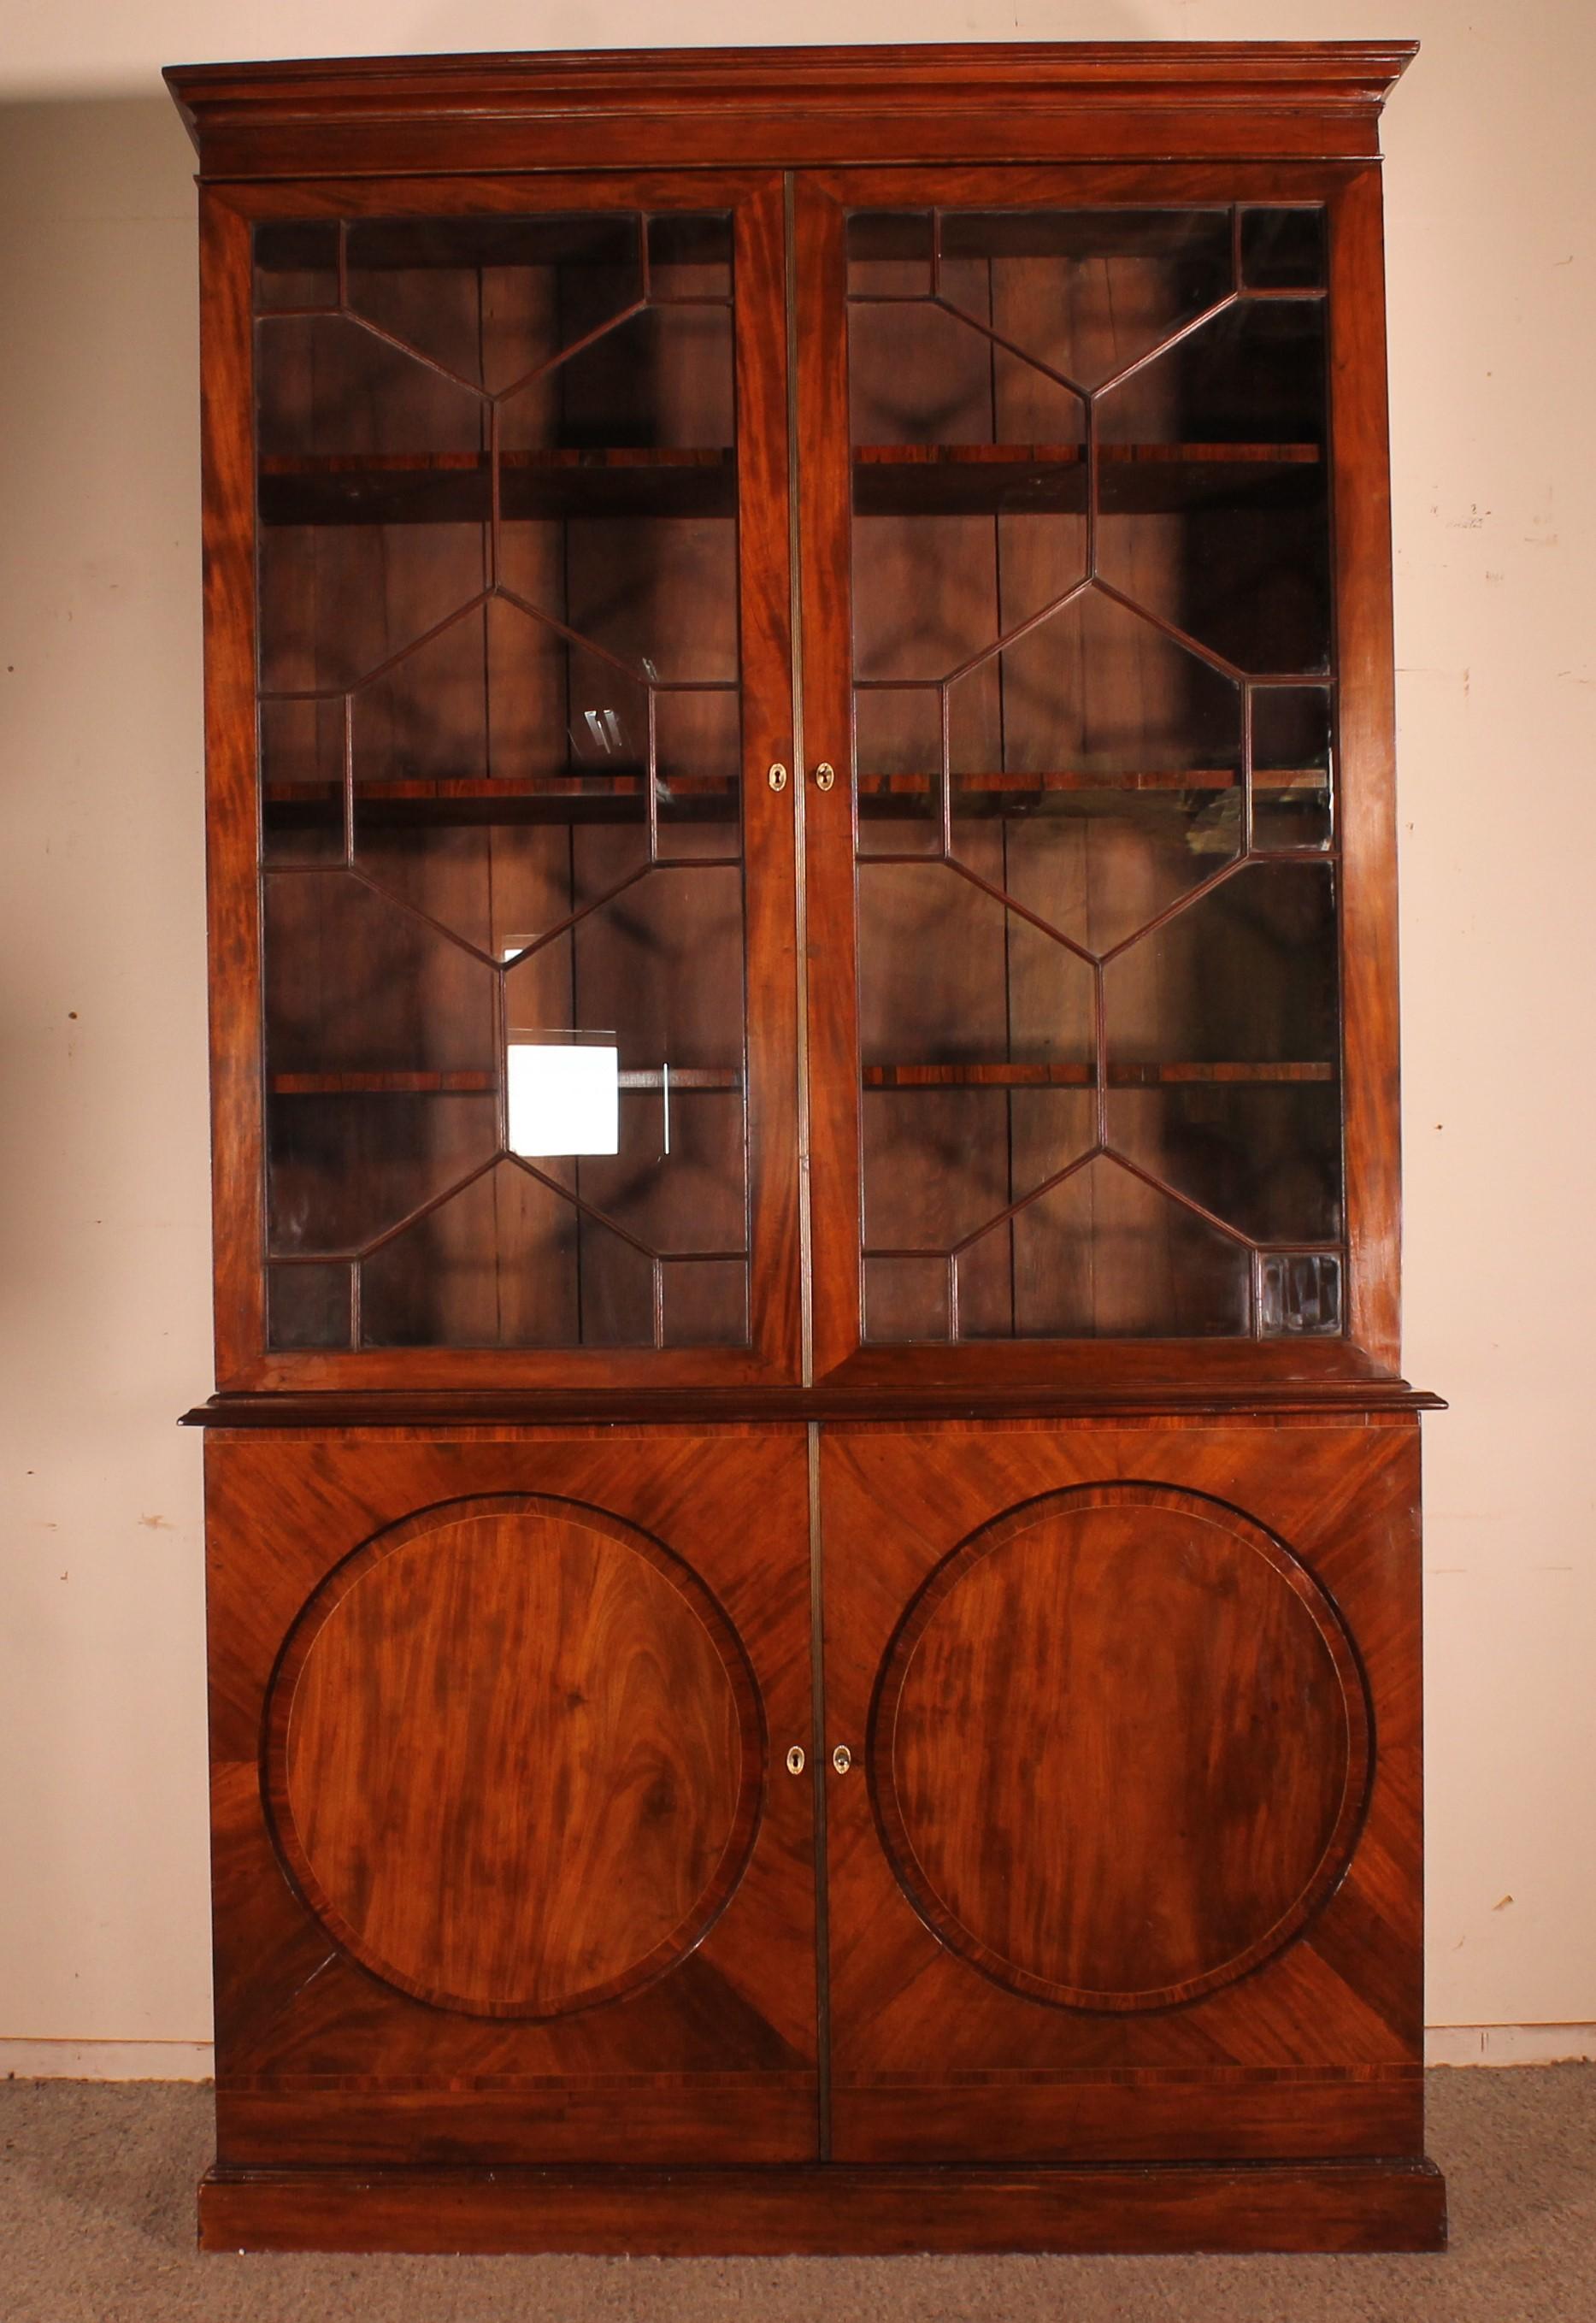 Superb English mahogany bookcase from the 18th century in the Hepplewhite style and period circa 1775

Very beautiful English work in mahogany which stands out by its very good quality and its period. Indeed, it is rare to find an 18th century